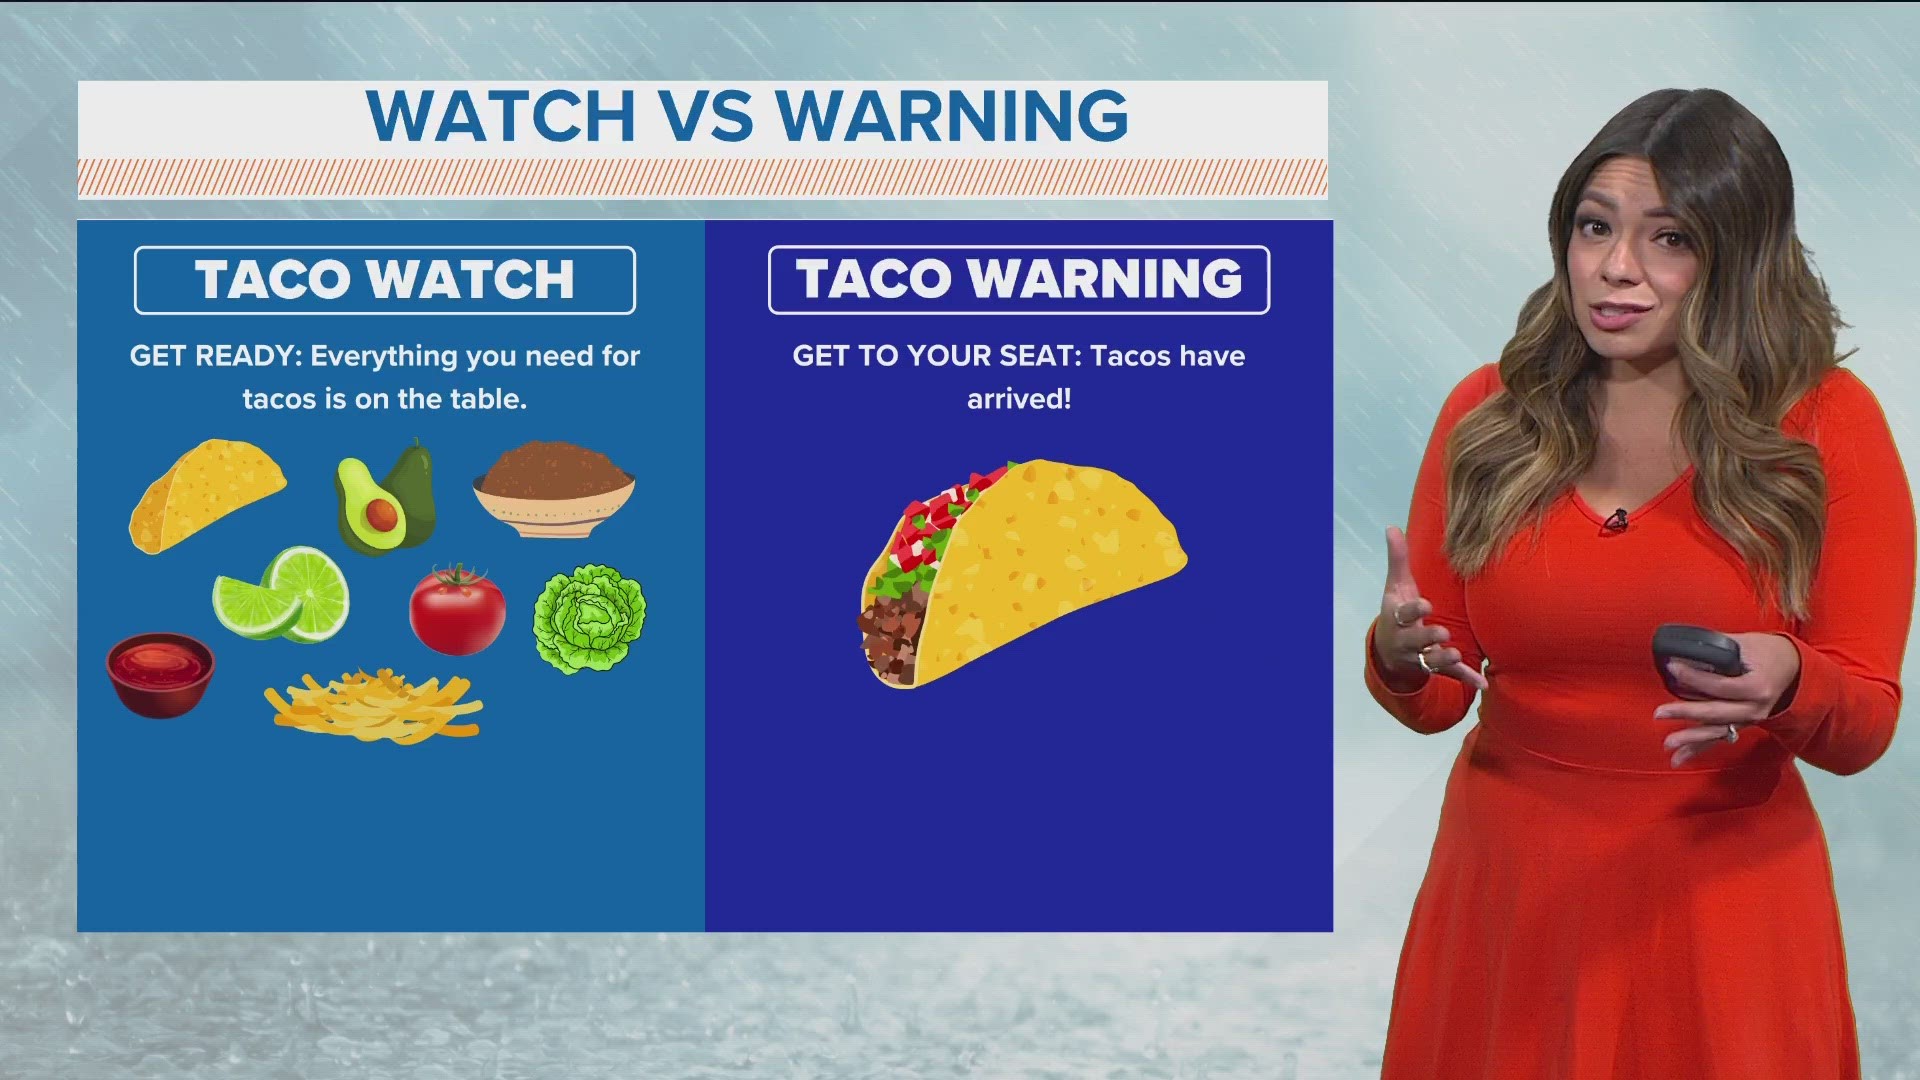 Hurricane WATCH vs WARNING, explained with tacos - The Adventures of  Accordion Guy in the 21st Century